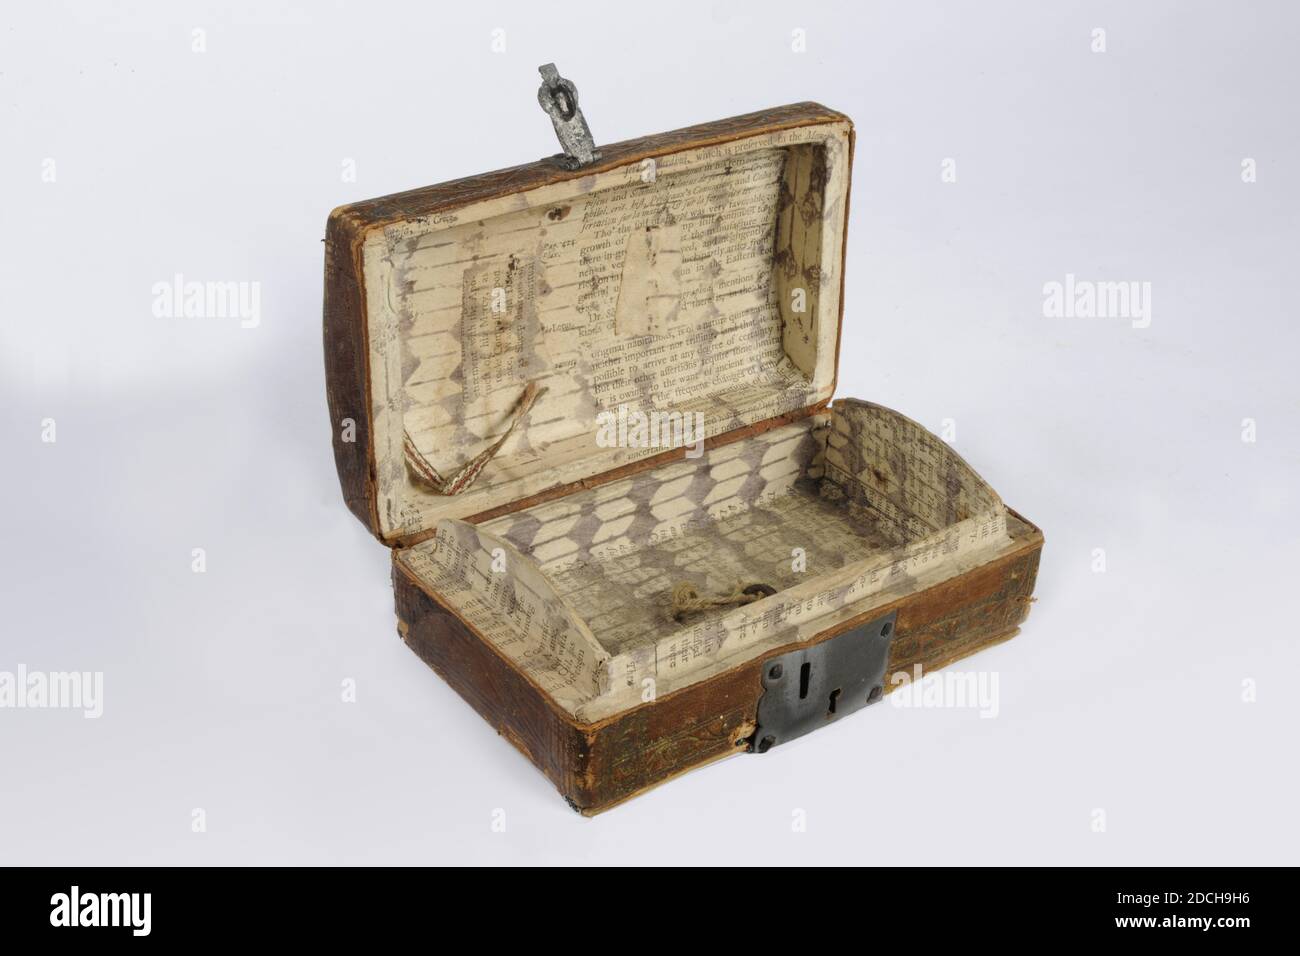 Anonymous, first quarter 18th century, leather, wood, paper, metal, Box:  6.6 x 18.4 x 9.5cm 66 x 184 x 95mm, Key: 3.4 x 1.6 x 0.3cm 34 x 16 x 3mm,  Rectangular